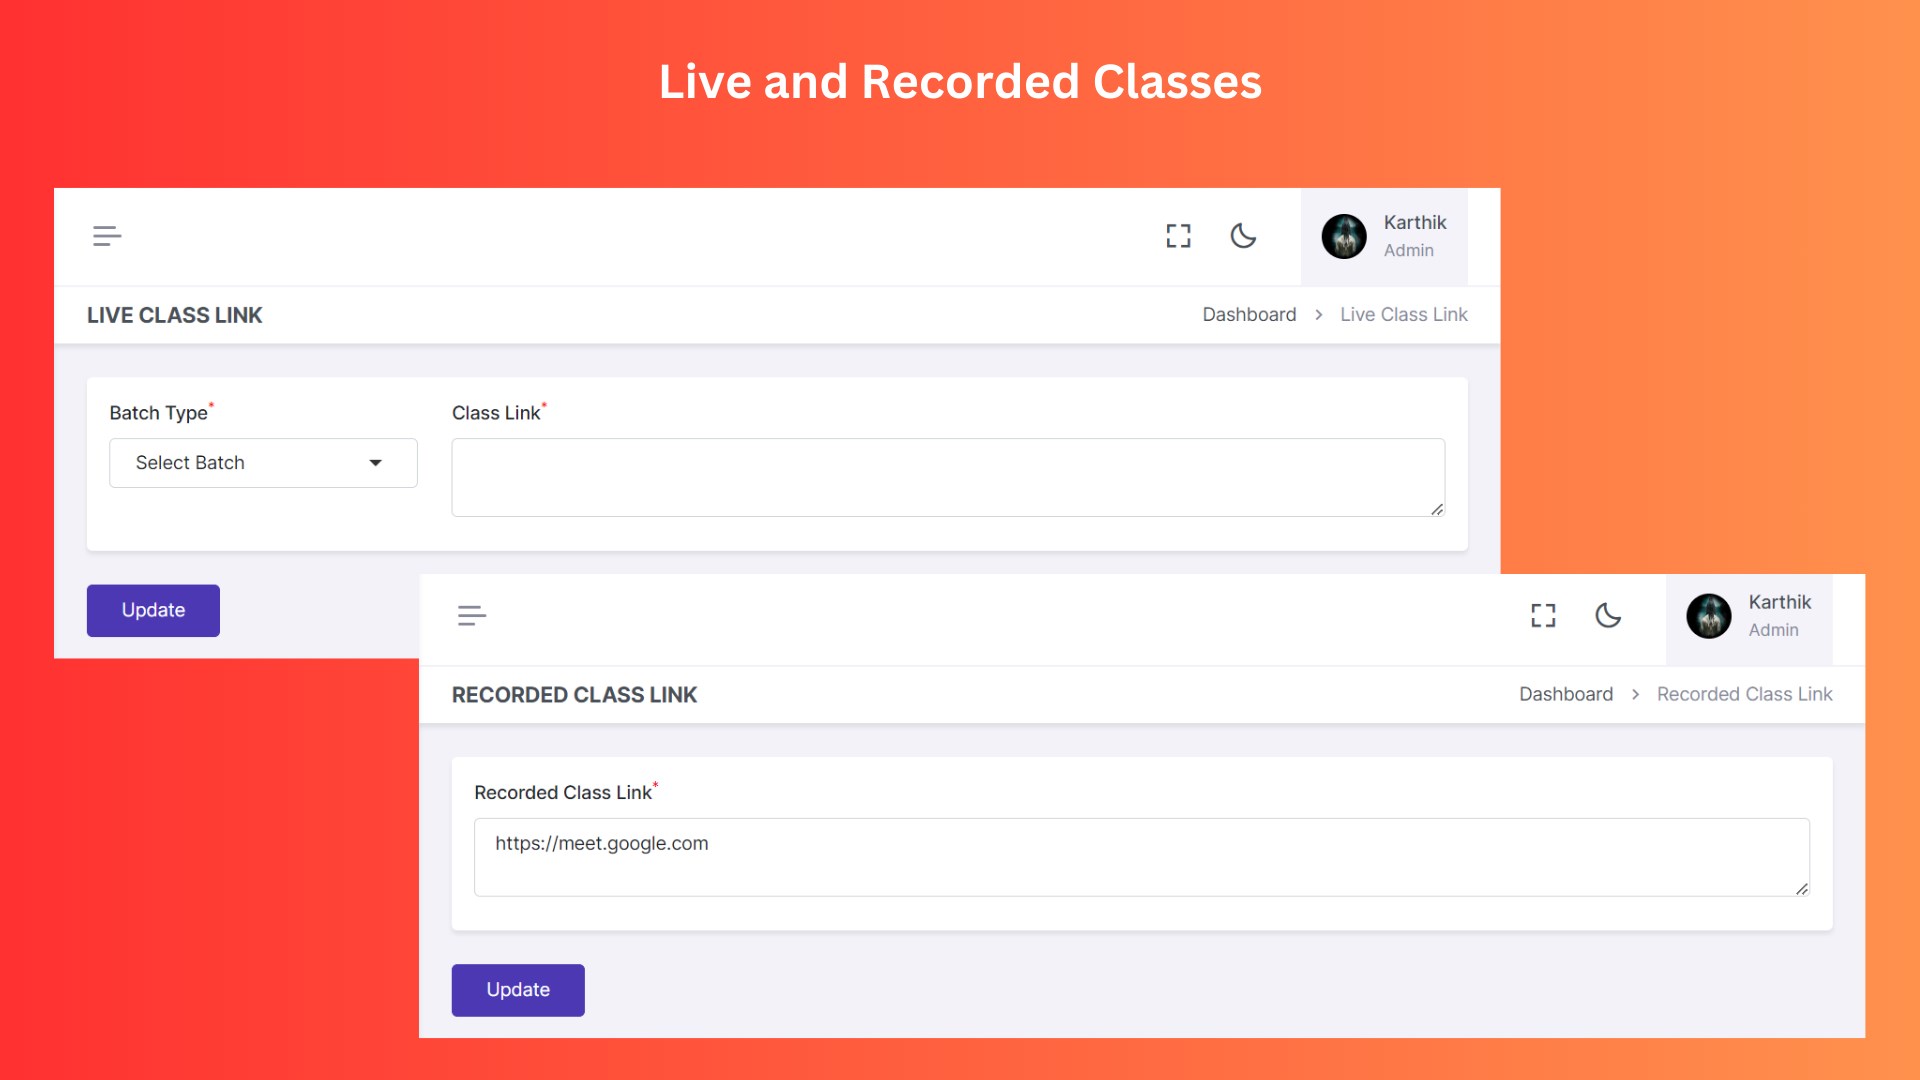 Feature to dynamically update live class and recorded class links.